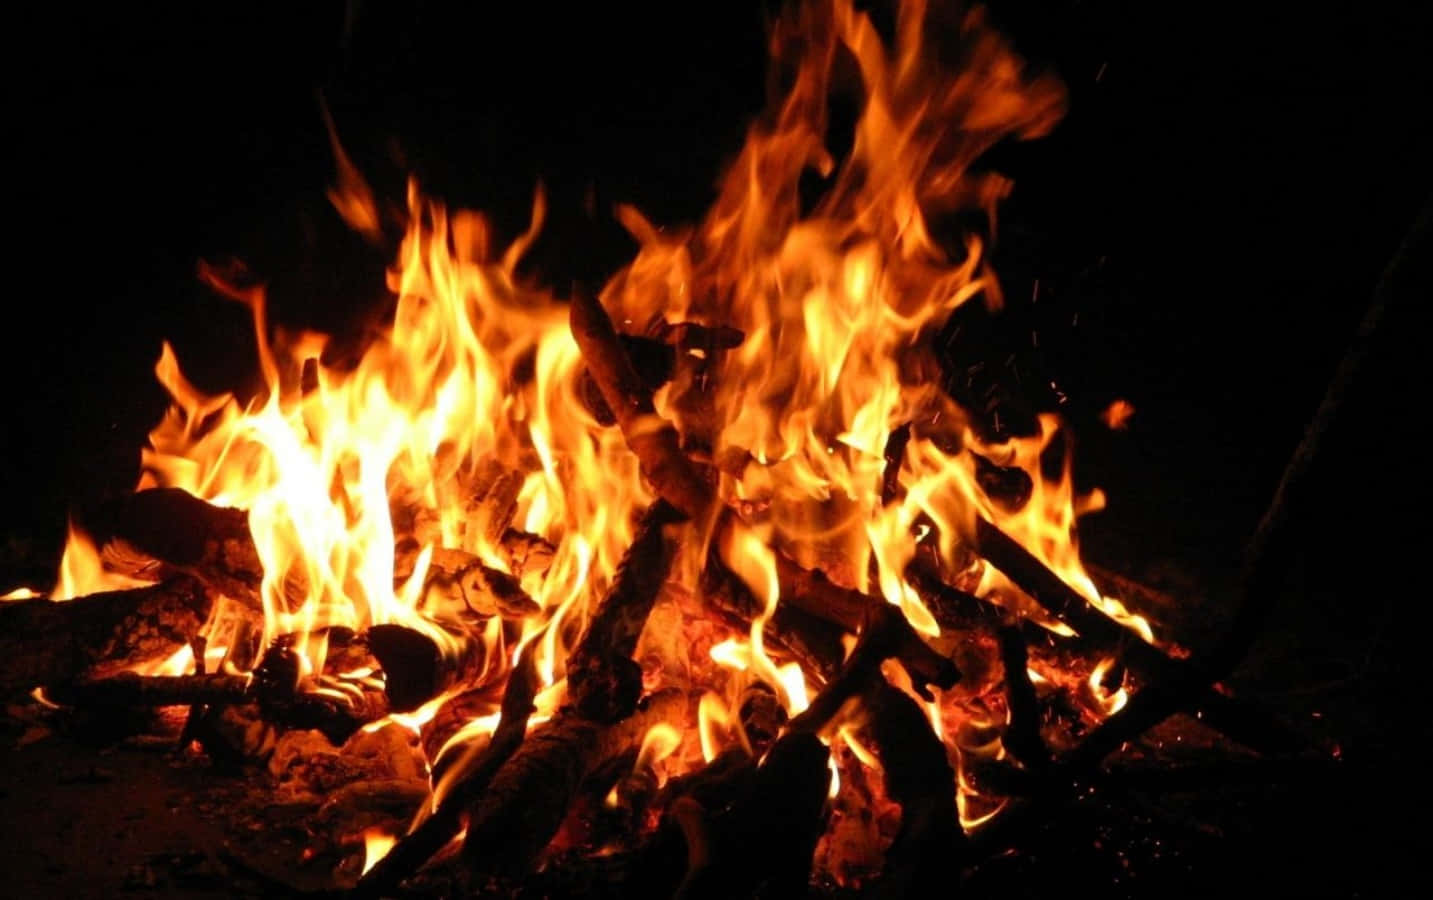 Free Cool Fire Wallpaper Downloads, [100+] Cool Fire Wallpapers for FREE |  